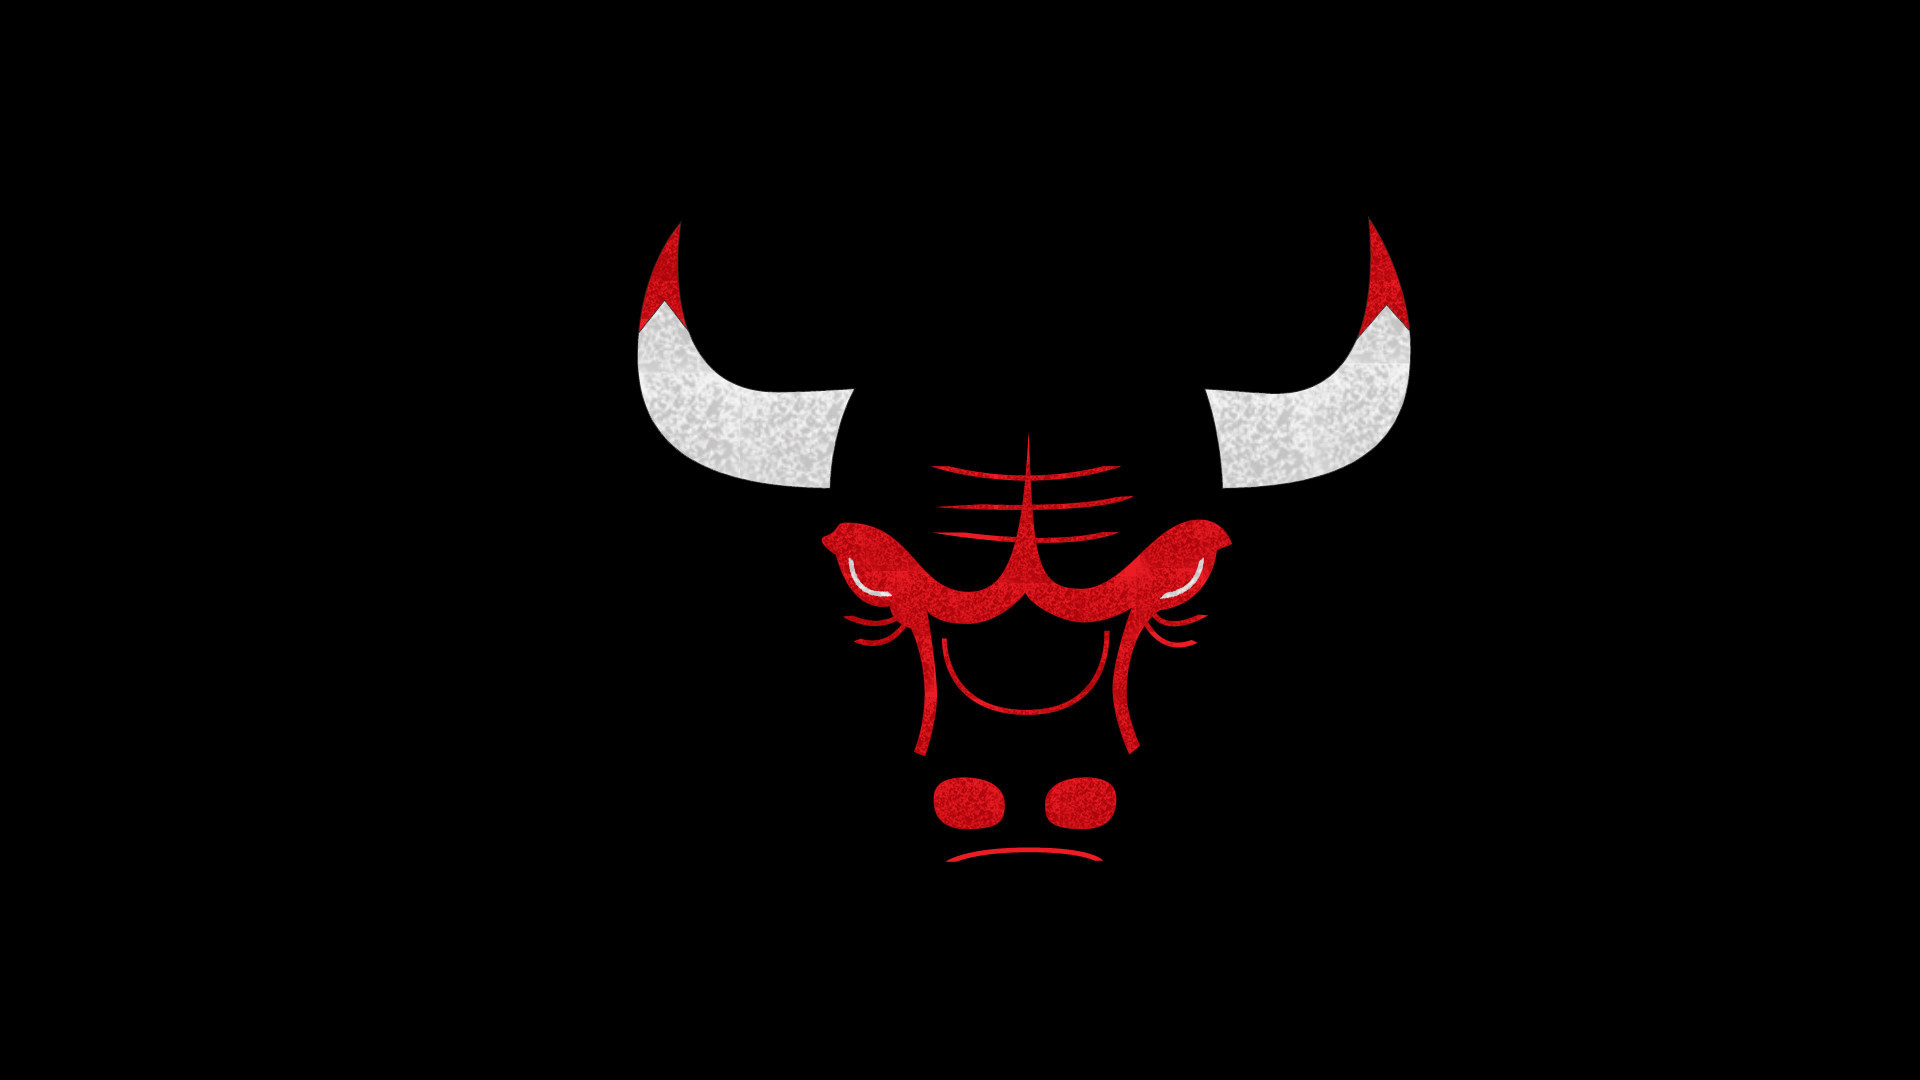 1920x1080 Chicago Bulls images | Chicago Bulls wallpapers